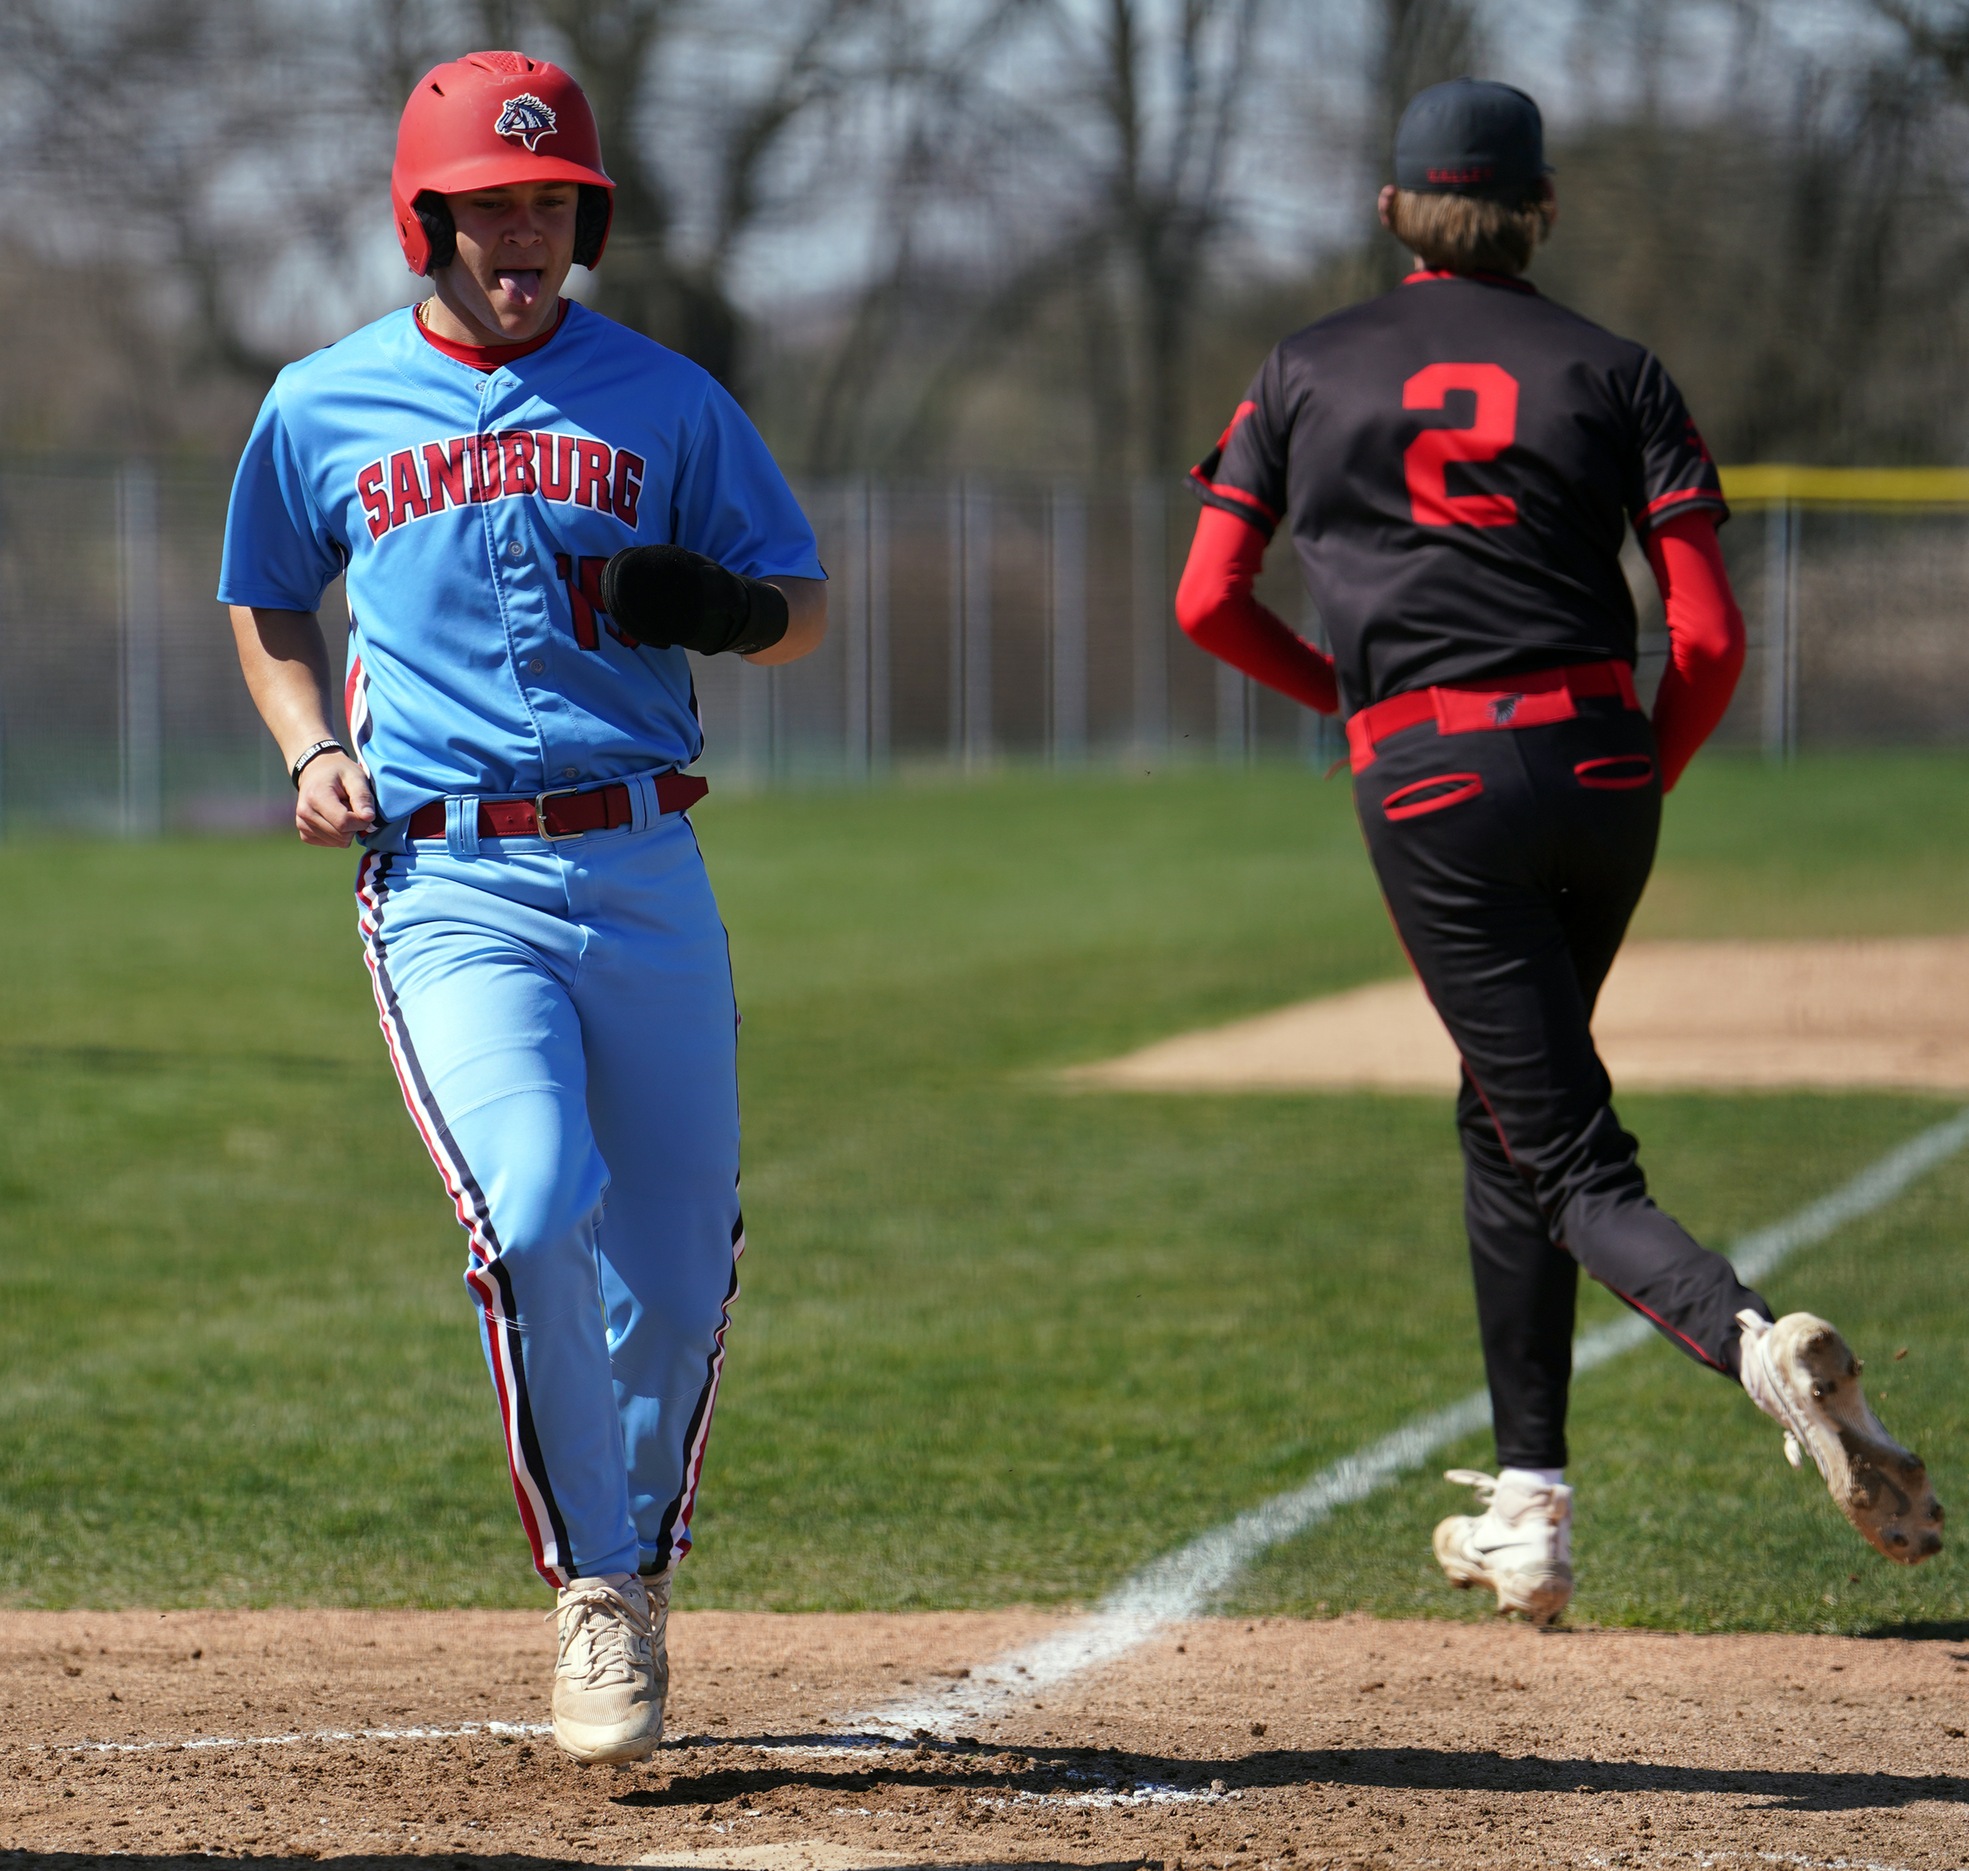 Wiegand stays hot with 4th HR in 4 games, but Chargers fall twice at Cobras